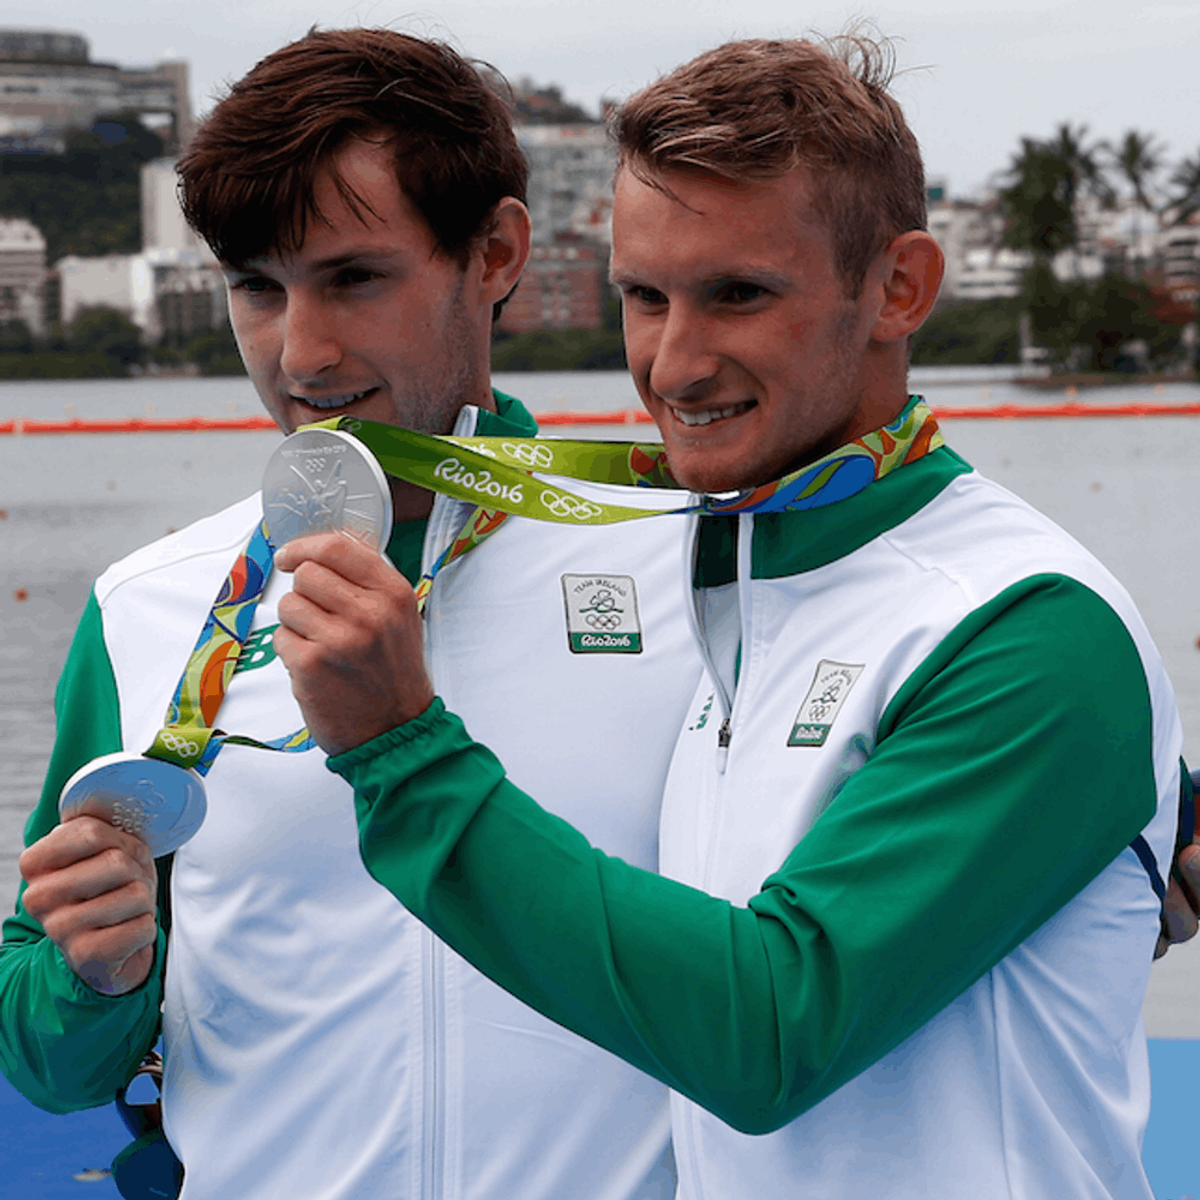 Meet the Irish Brothers Stealing Everyone’s Hearts With Their Hilarious Post-Olympic Win Interview